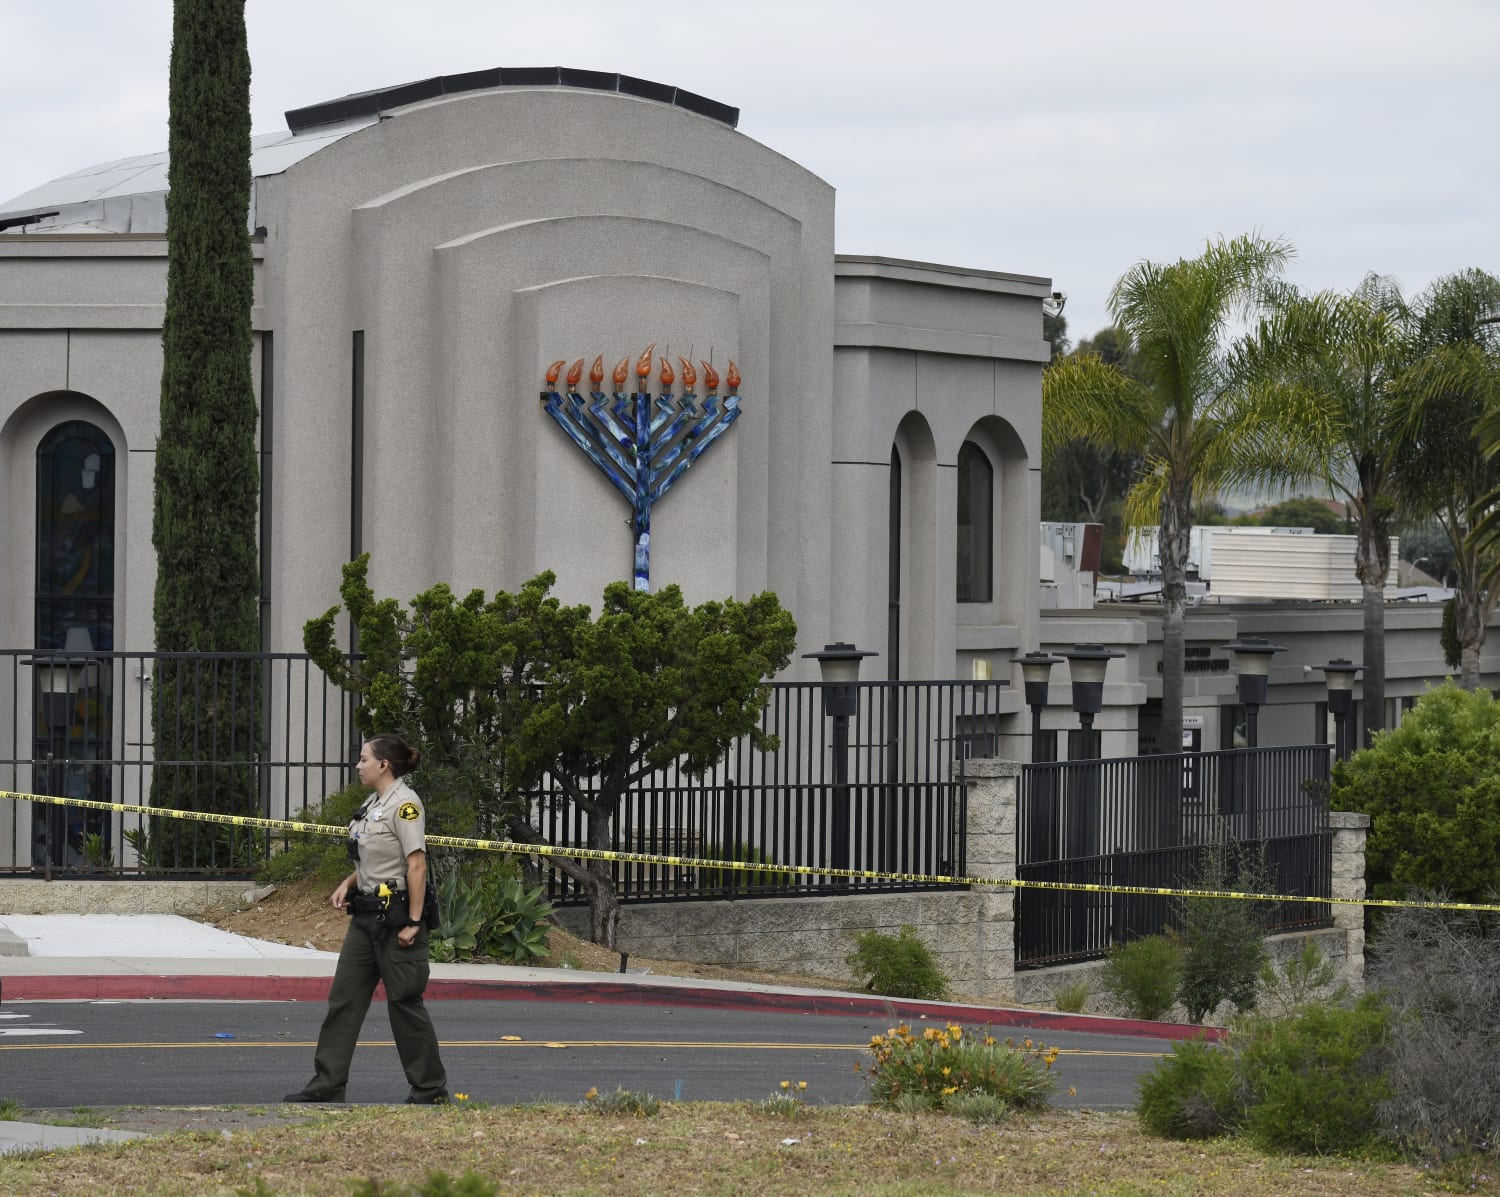 California man sentenced to additional life term in synagogue shooting, mosque fire